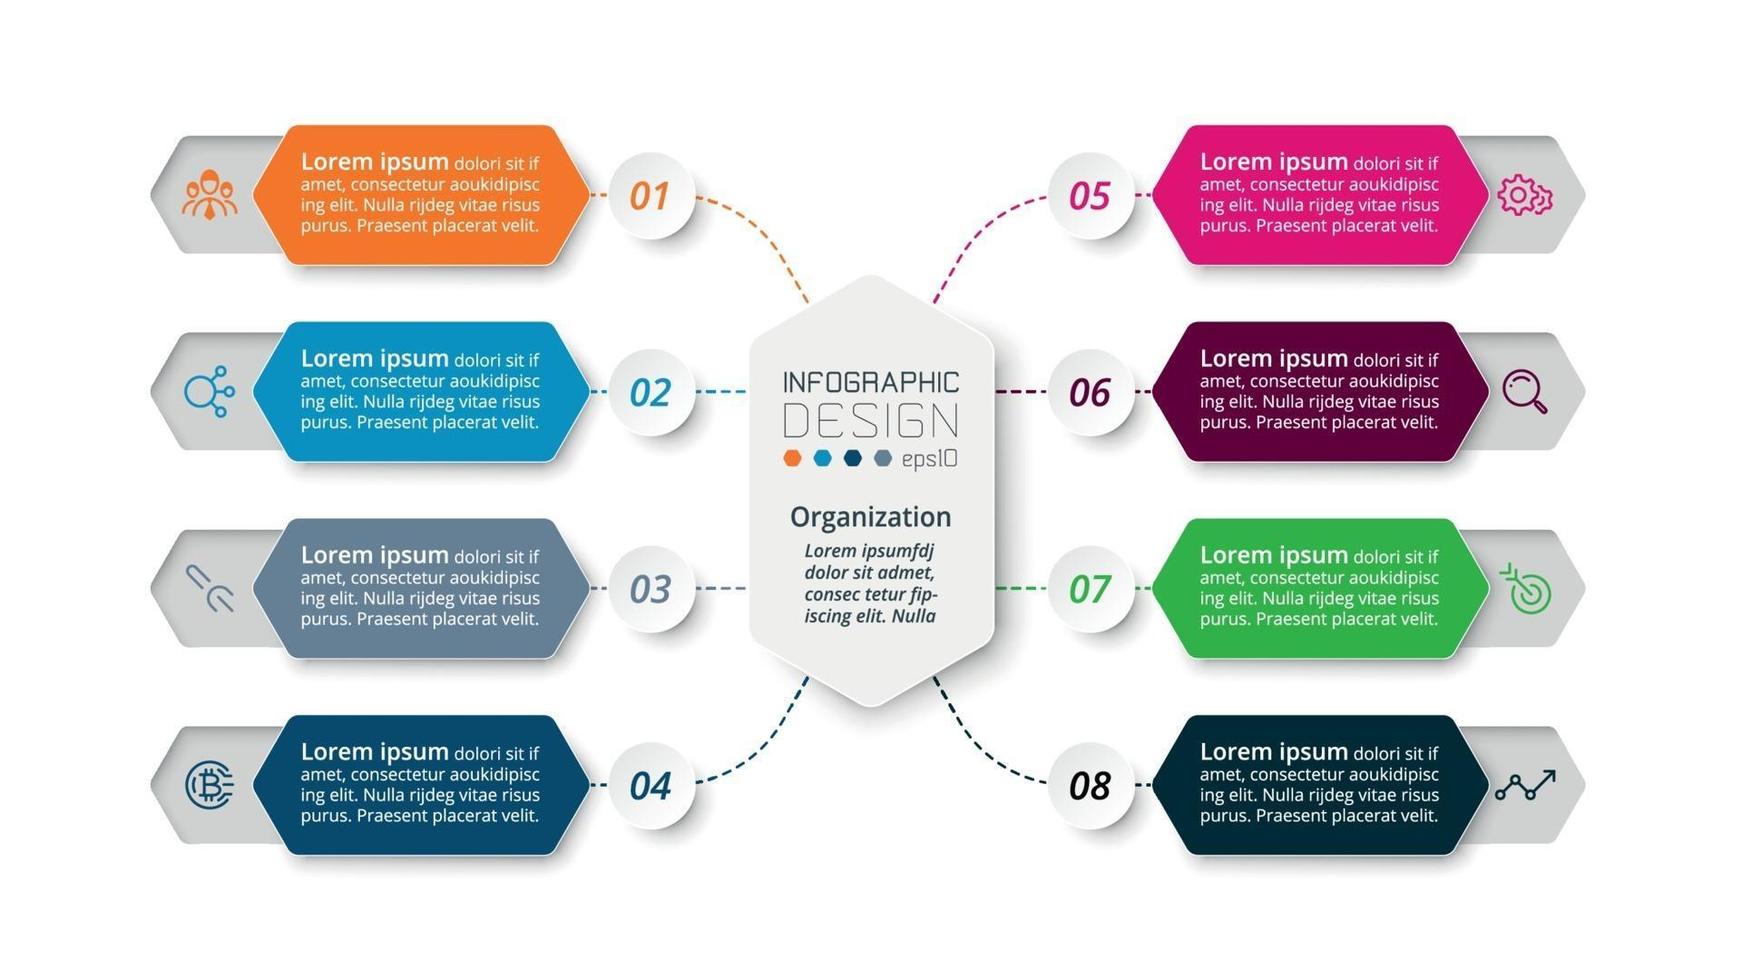 8-step work process through a hexagonal design describes a function or presents information about a business or organization. vector infographic.